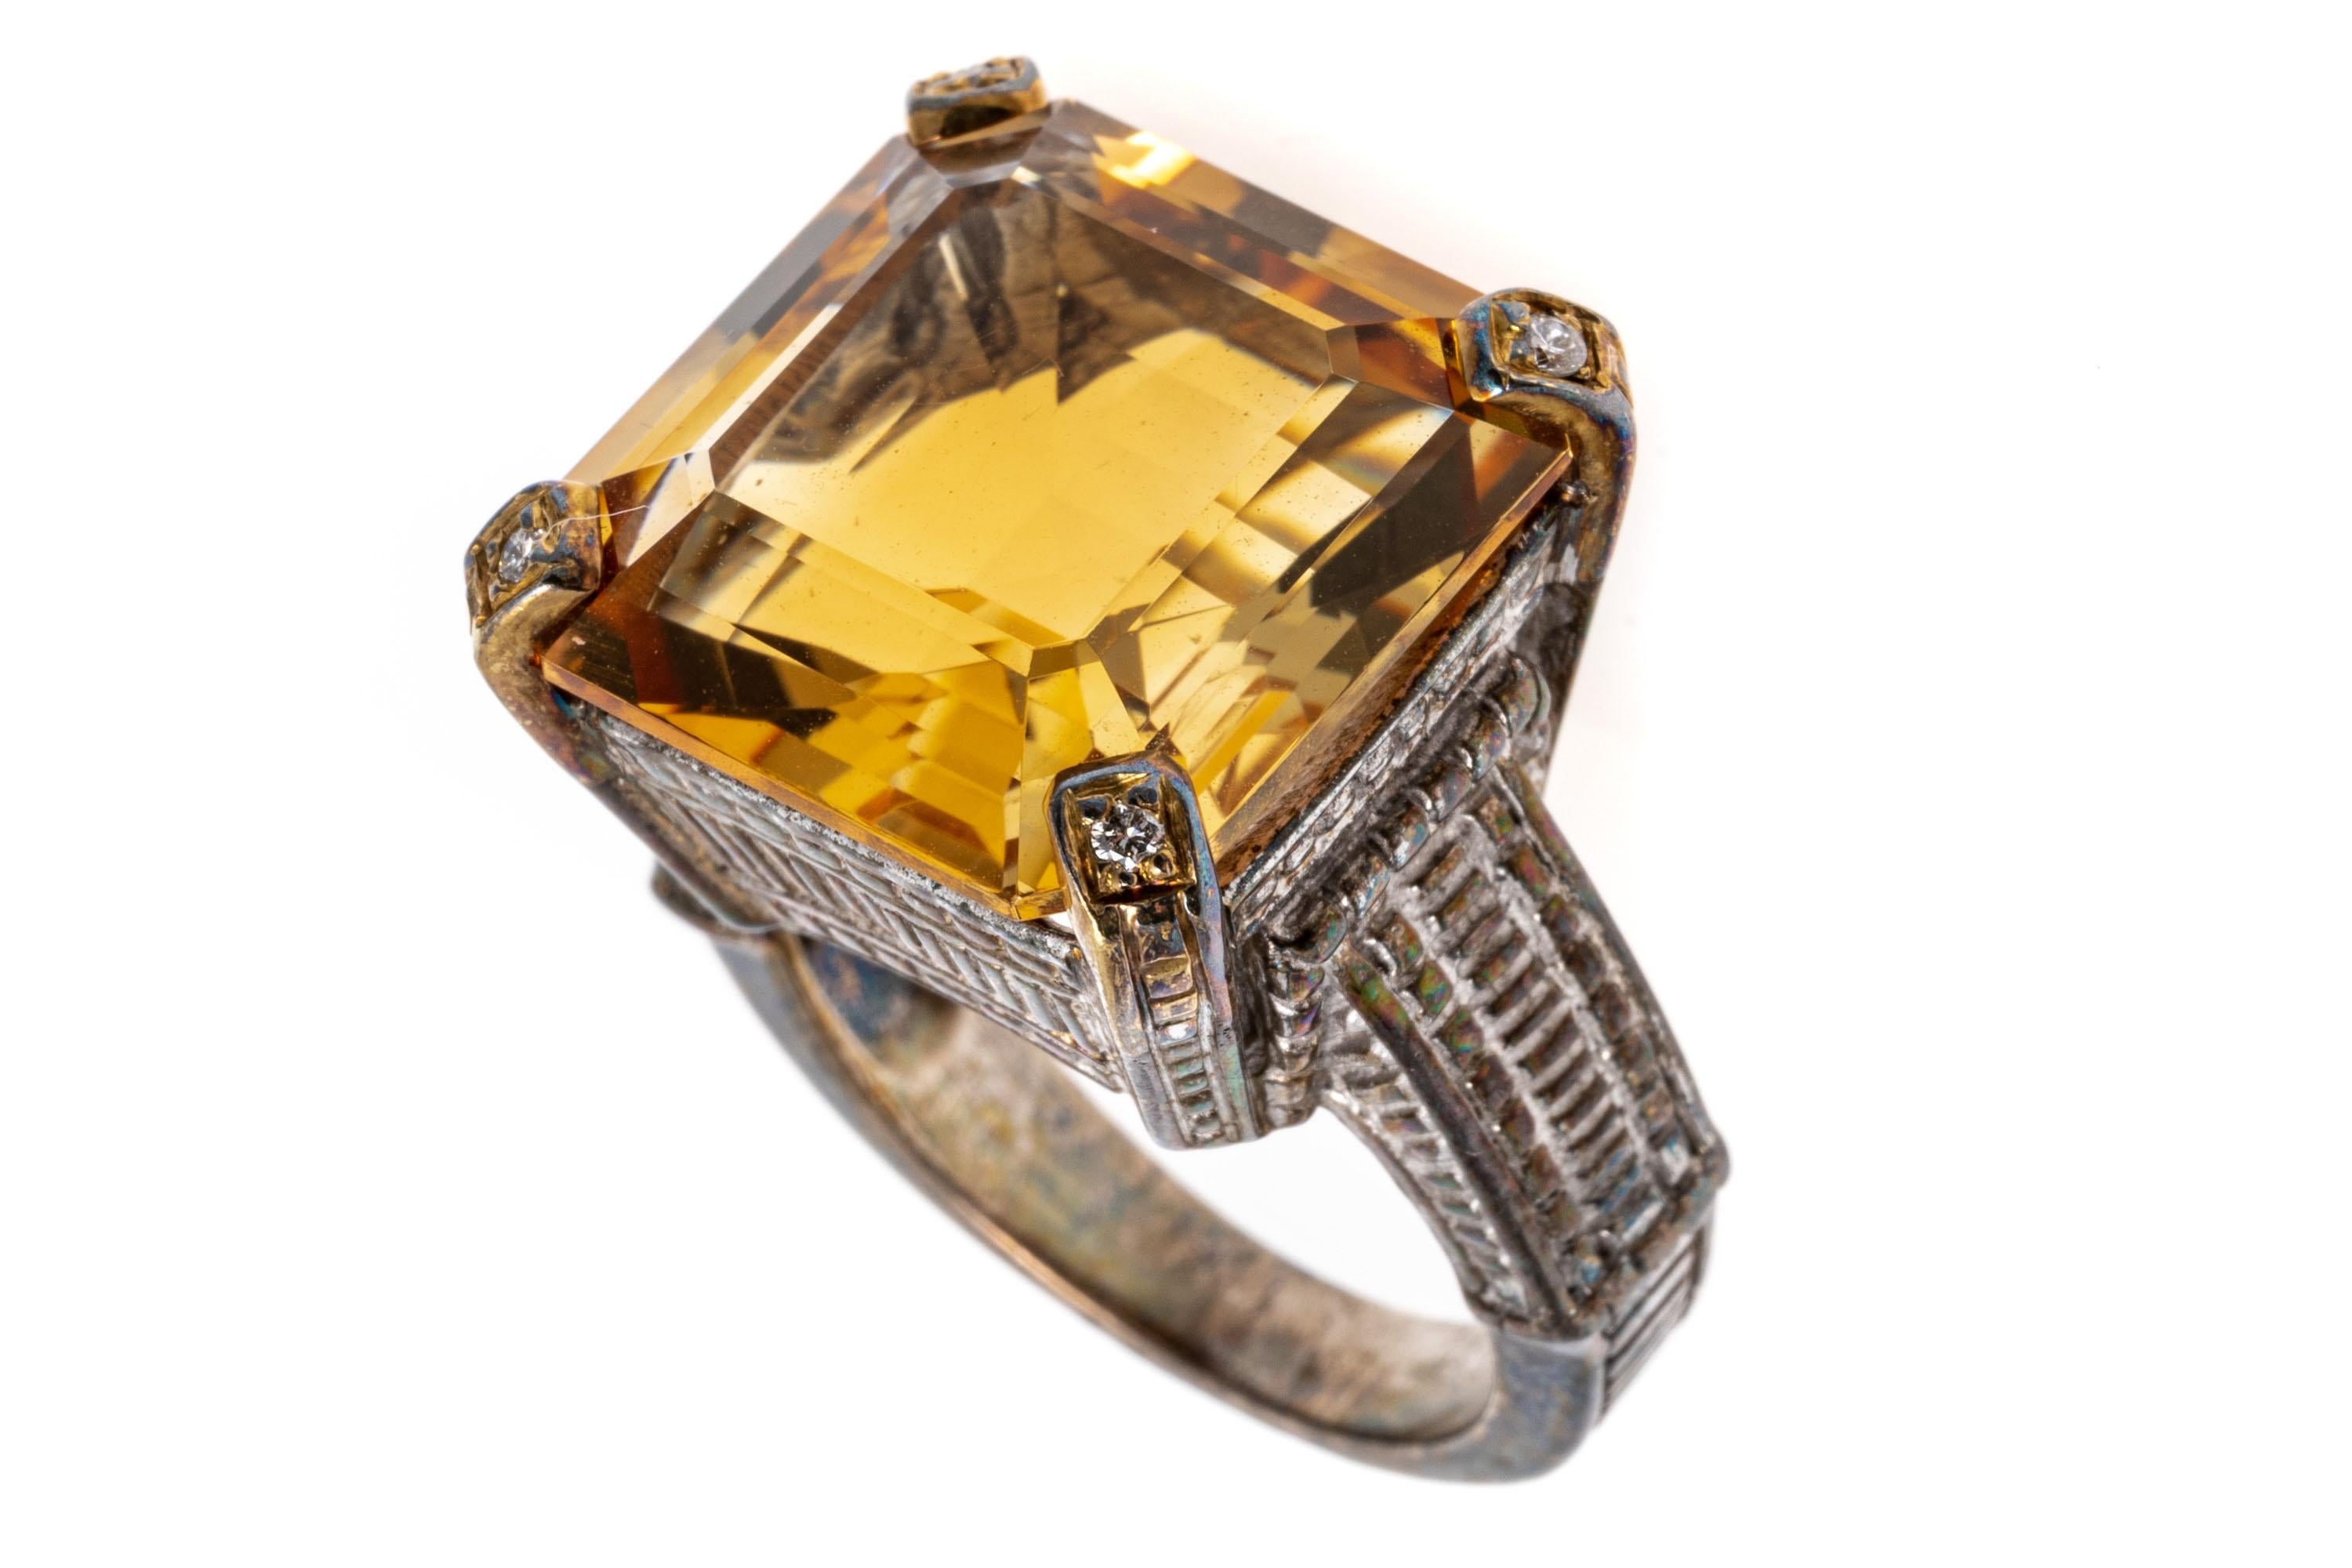 Sterling silver and gold ring. This interesting patterned sterling silver ring features a square faceted, medium to light golden yellow color center citrine, approximately 13.74 CTS, decorated with round faceted, diamond set prongs, approximately